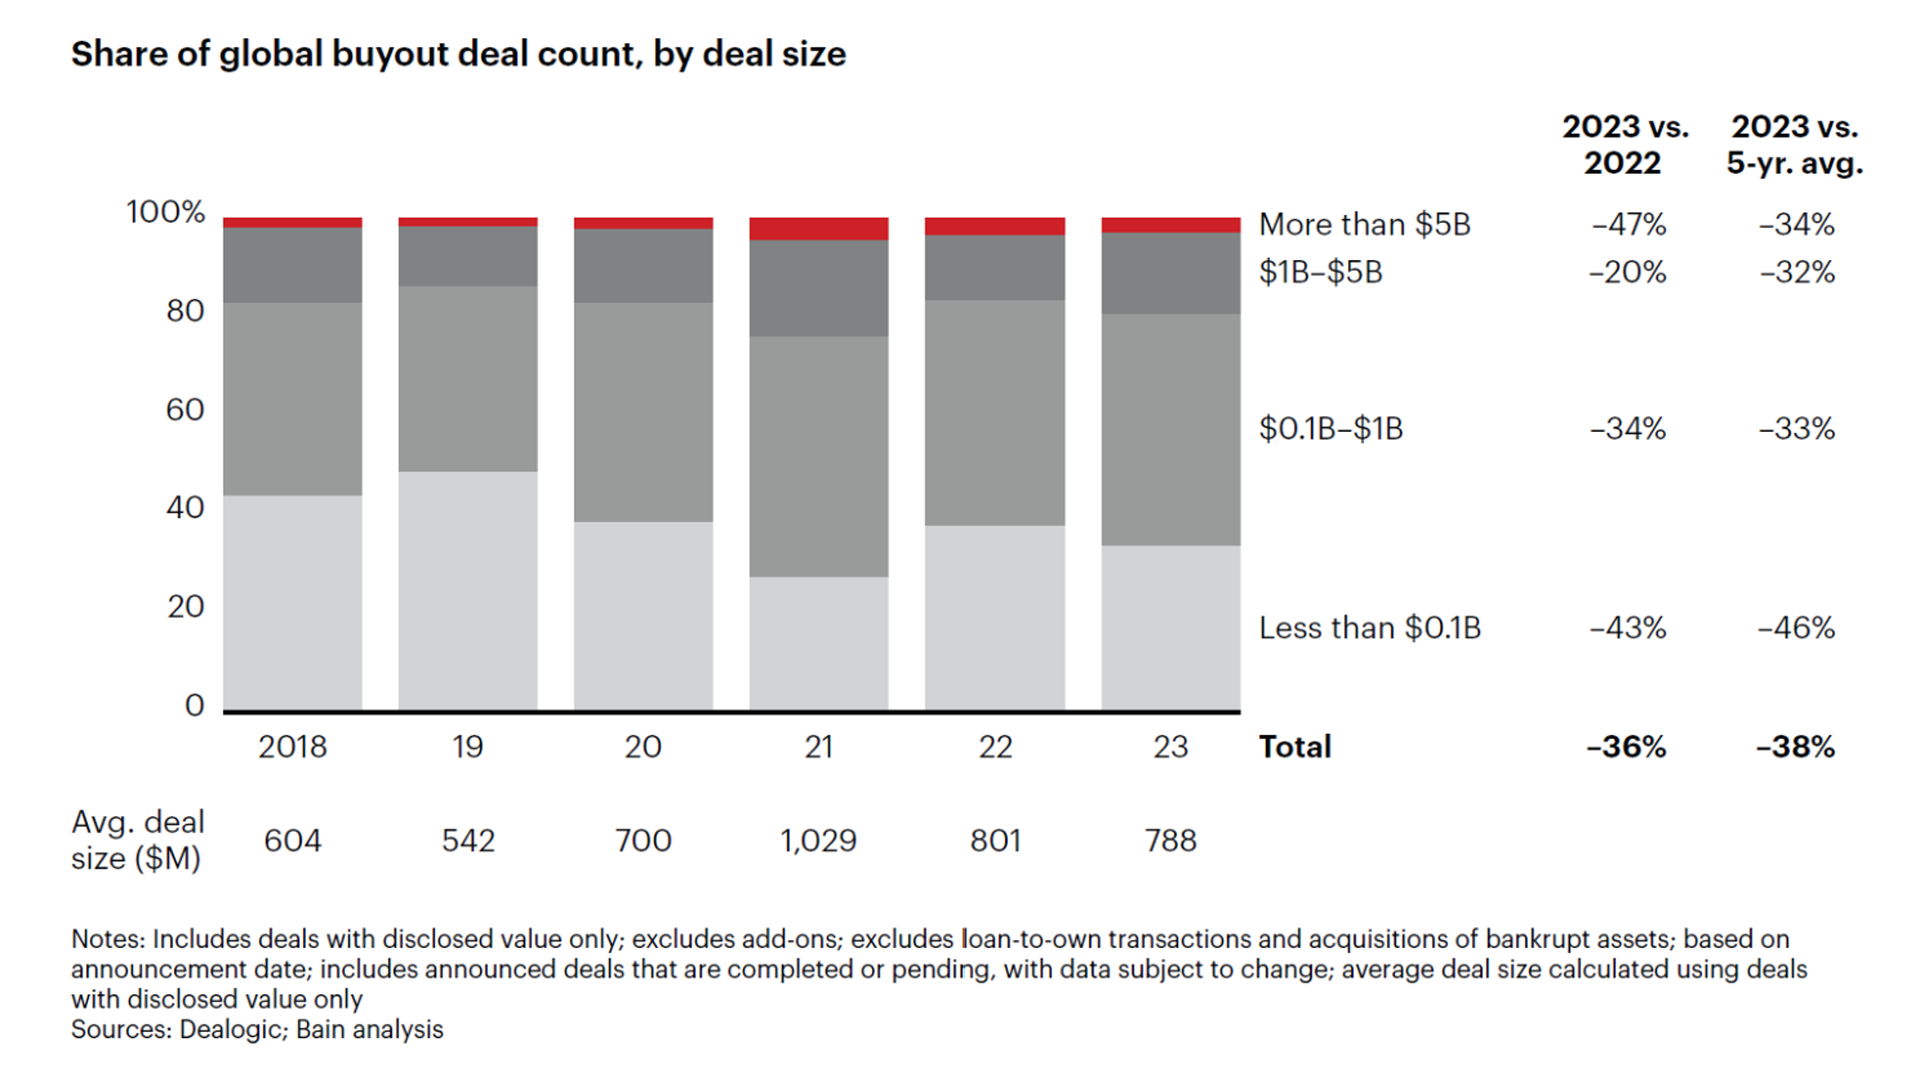 Share of Global Buyout Deal Count, by deal size